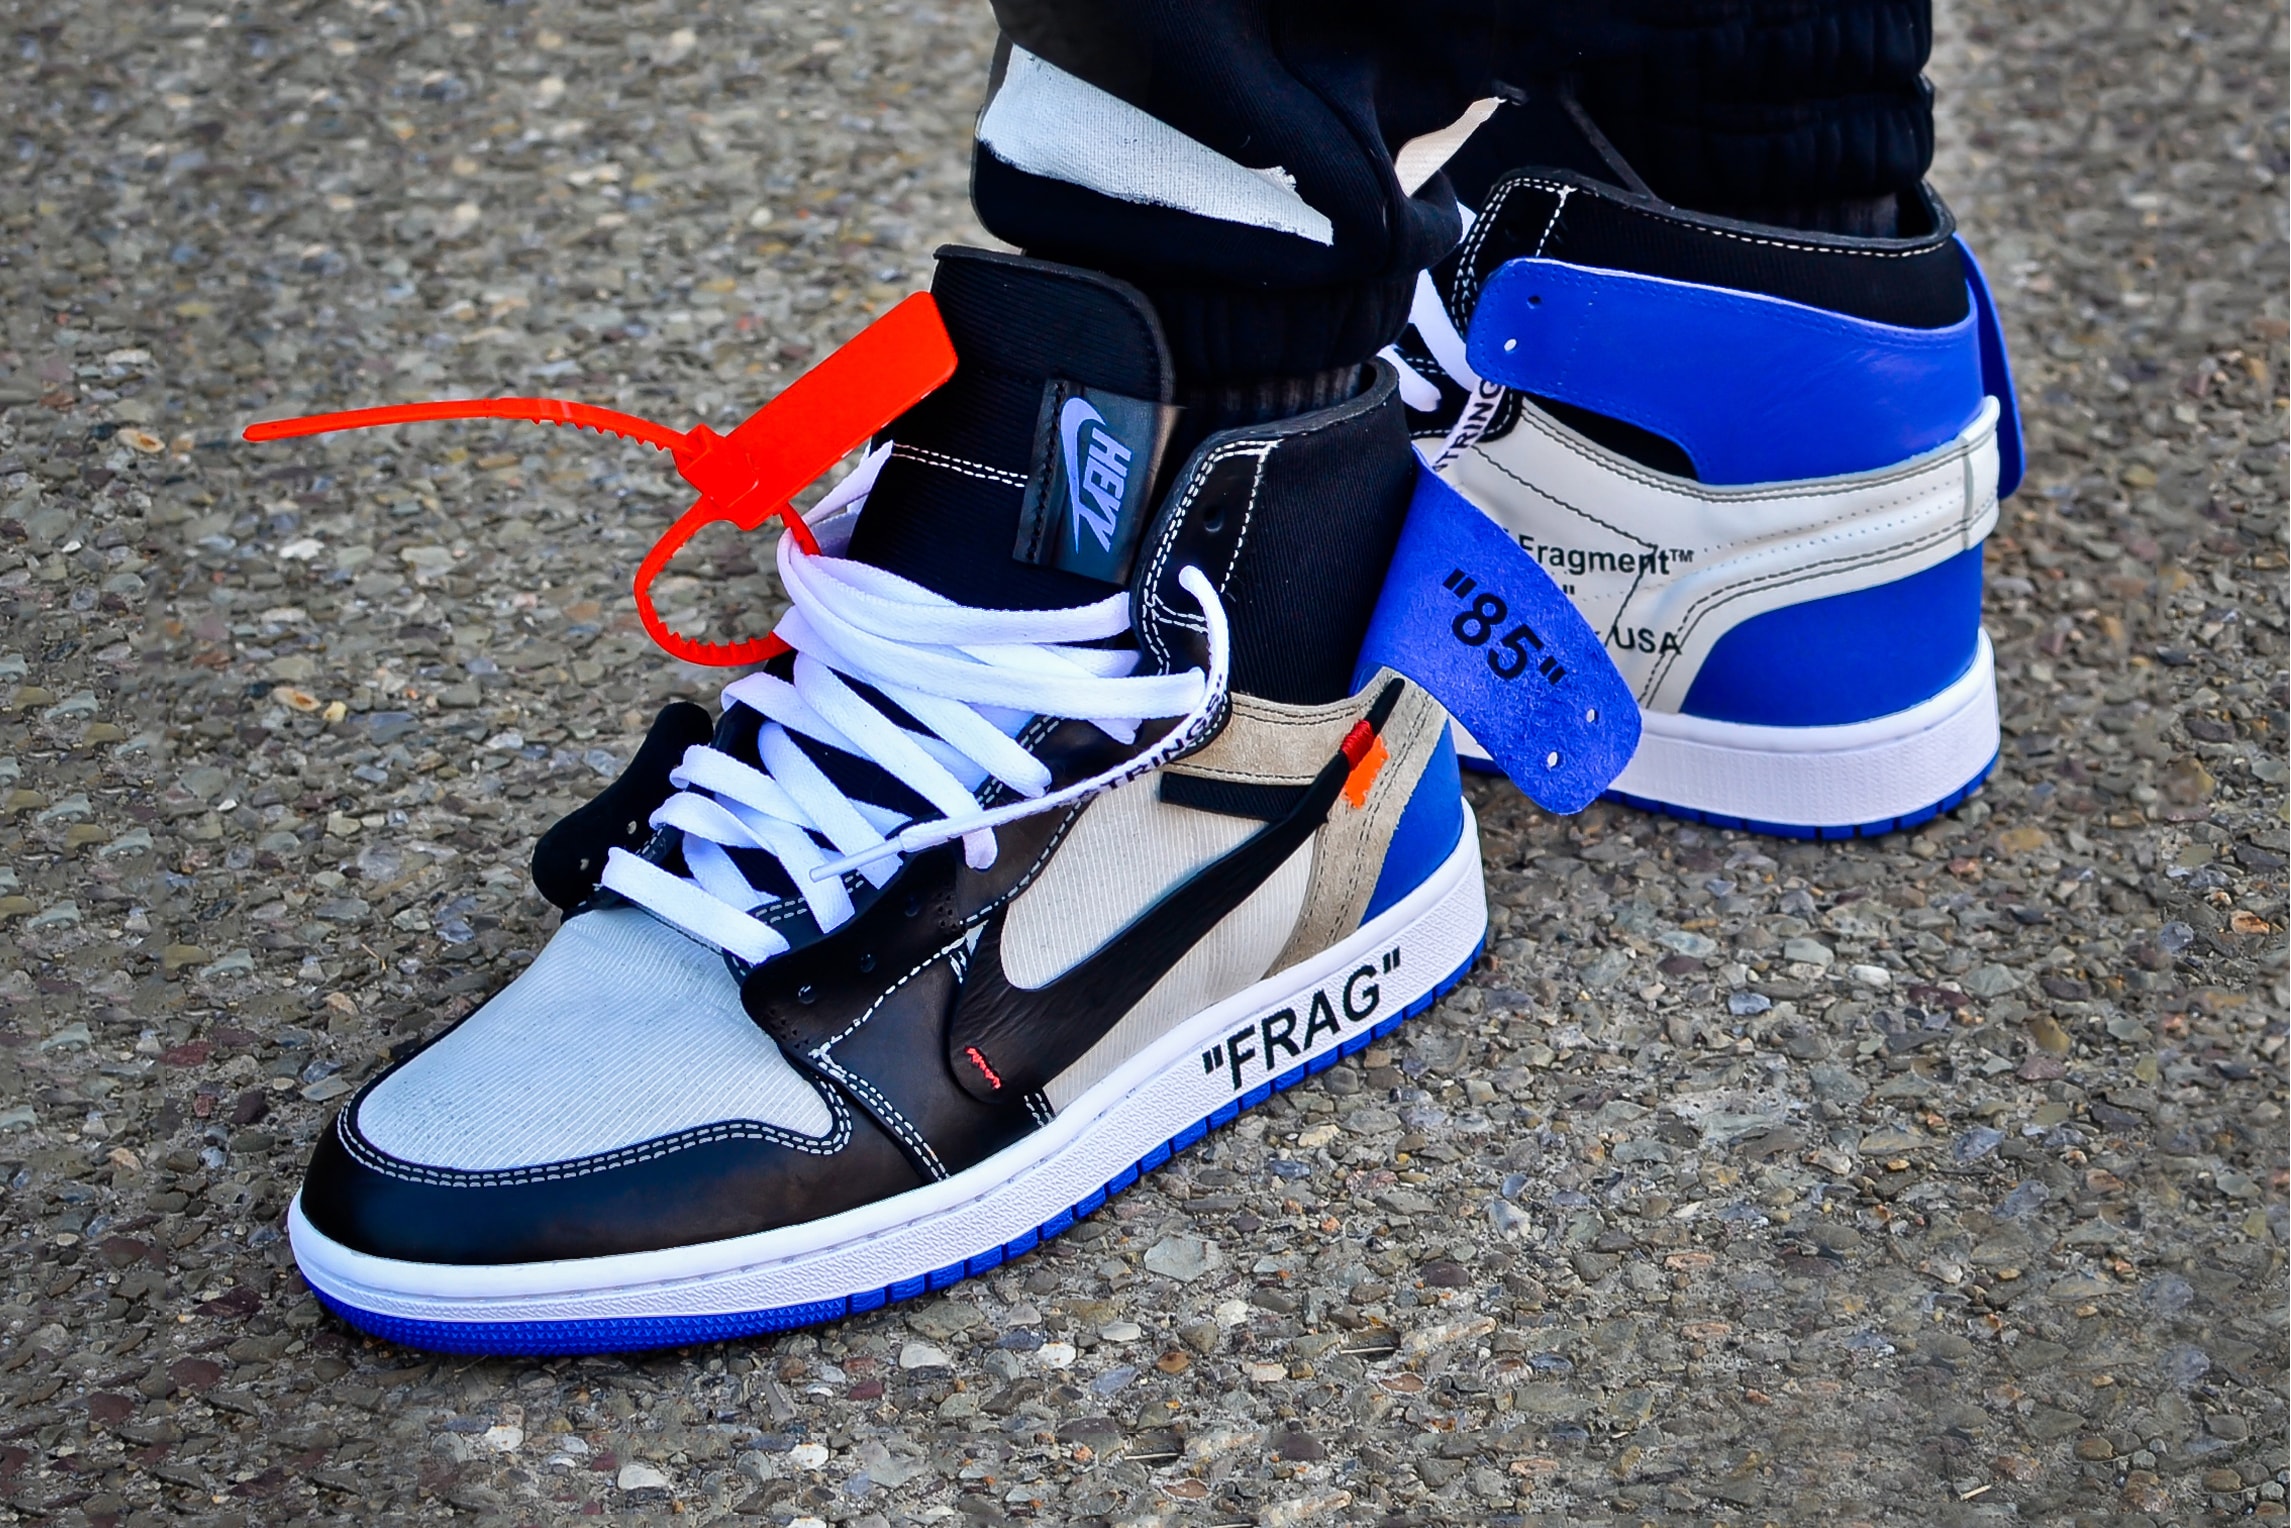 Off-White X Air Jordan 1 Sneakers Resale Prices Surge After Virgil Abloh  Death - Bloomberg